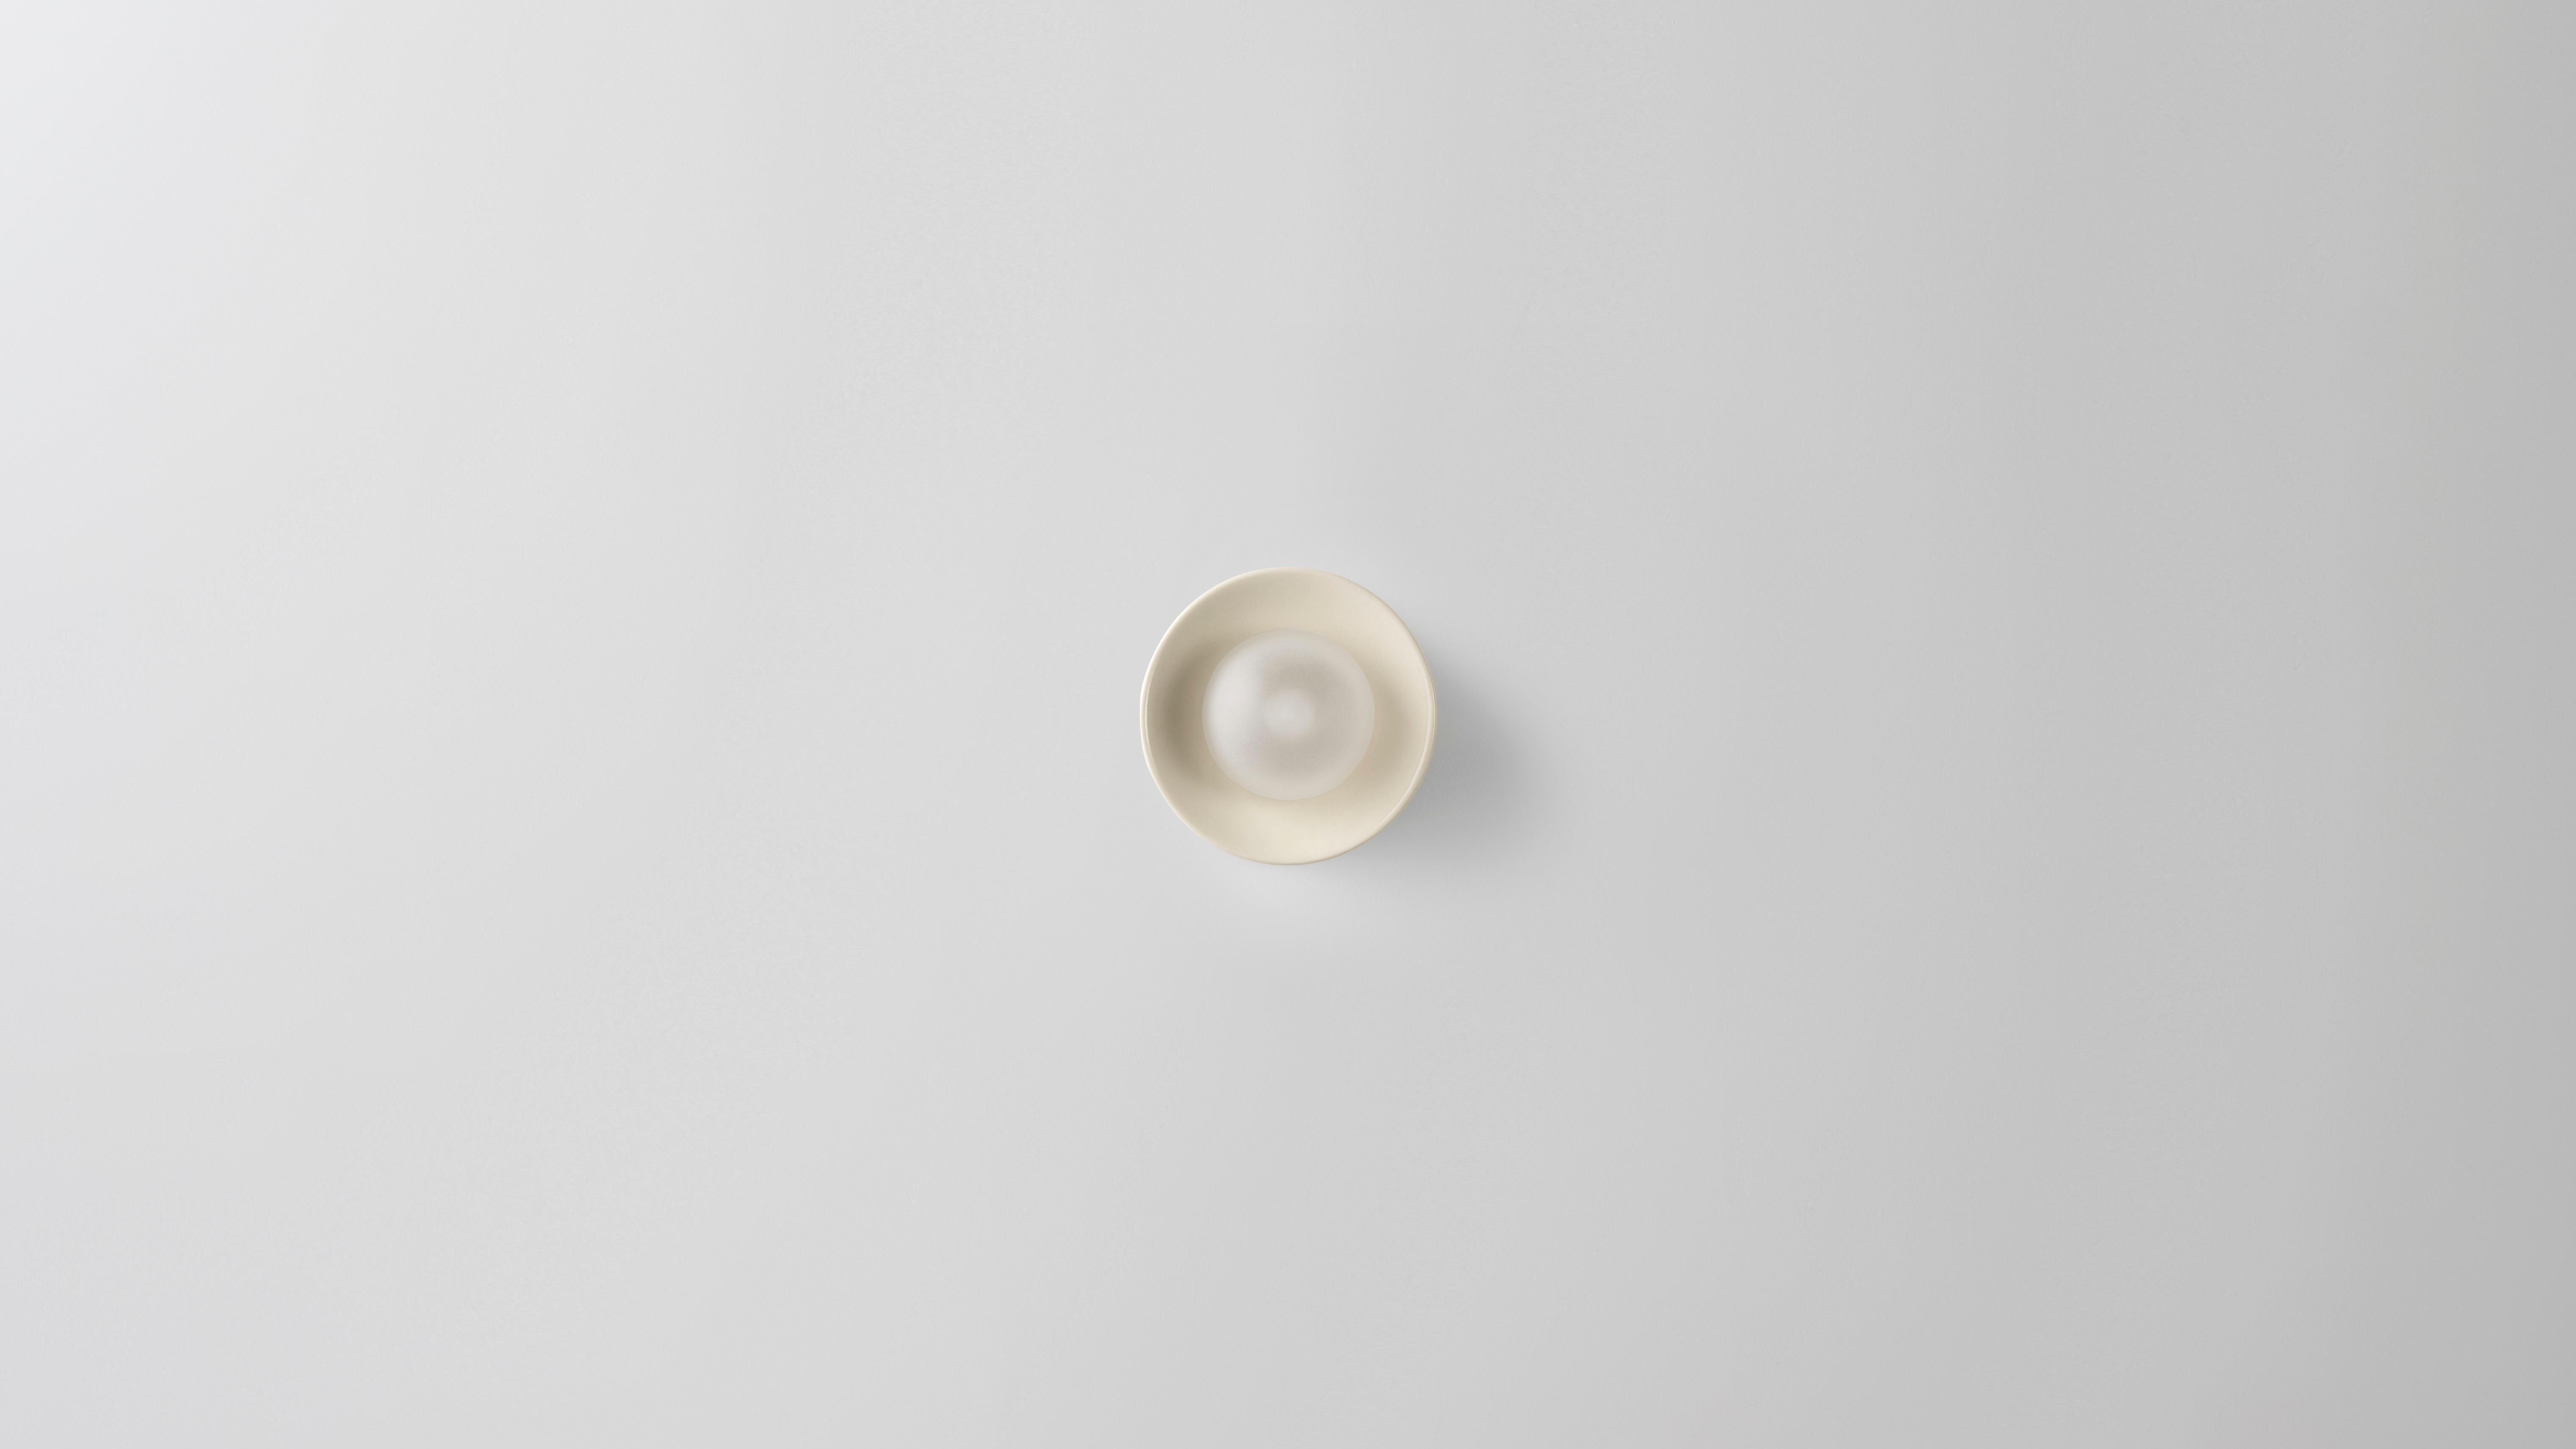 Micro ceramic Anton wall sconce by Volker Haug
Dimensions: Ø 8 x D 6 cm.
Material: cast ceramic. 
Finish: glazed clear, brown, or crisp white.
Lamp: G9 LED (240V / 120V US). 12V option is available.
Glass Bulb: 45mm ø, Frosted
Weight: 1kg
Available